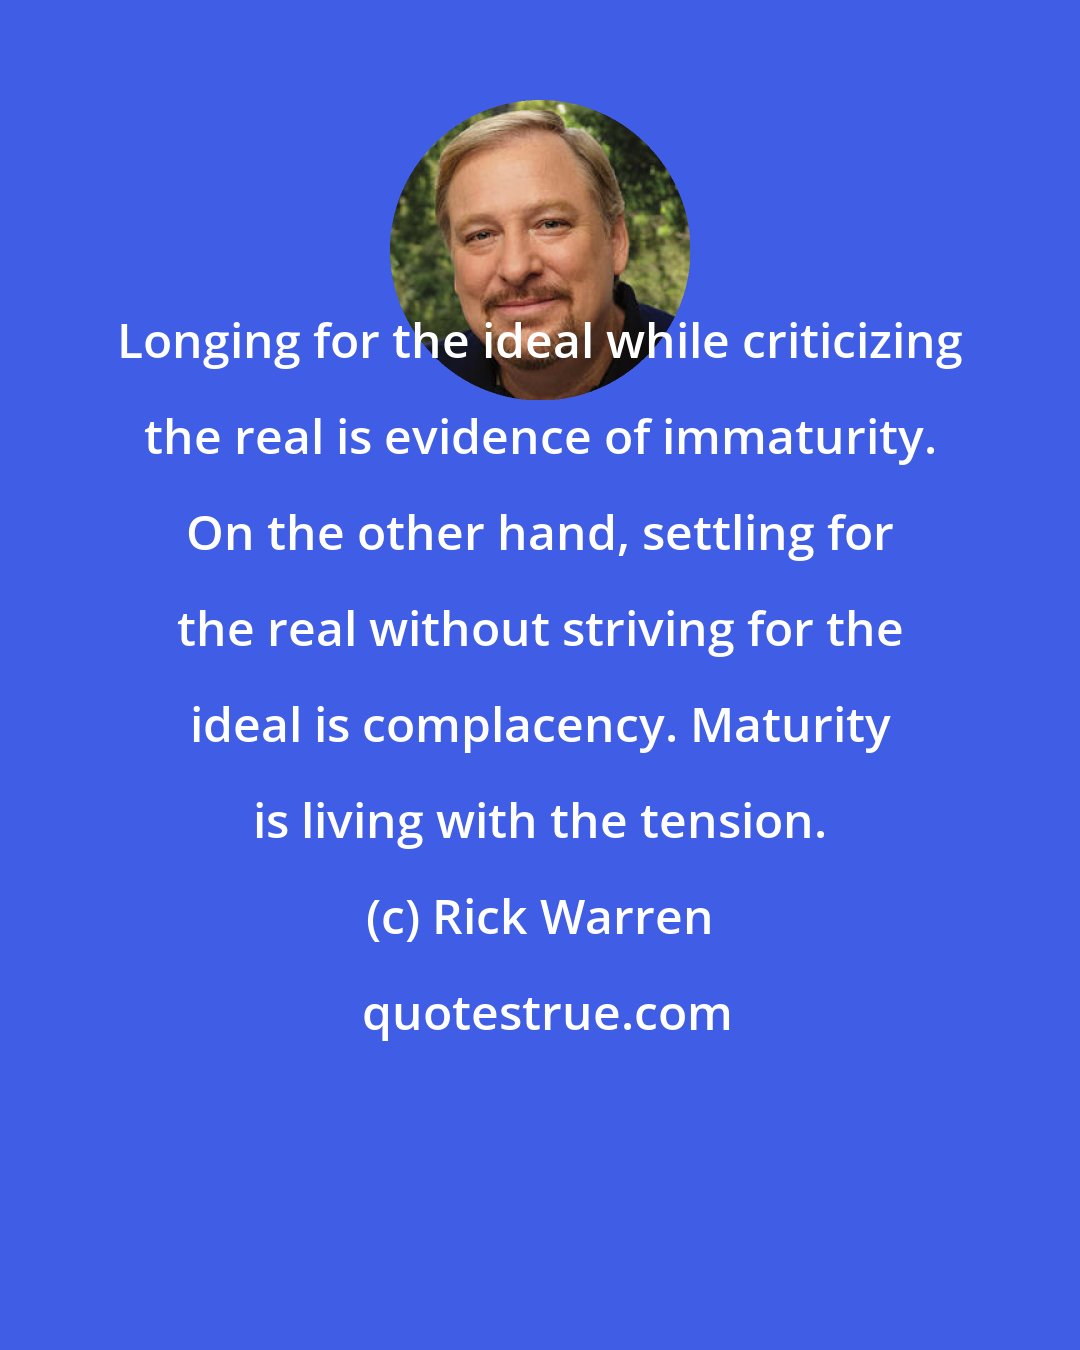 Rick Warren: Longing for the ideal while criticizing the real is evidence of immaturity. On the other hand, settling for the real without striving for the ideal is complacency. Maturity is living with the tension.